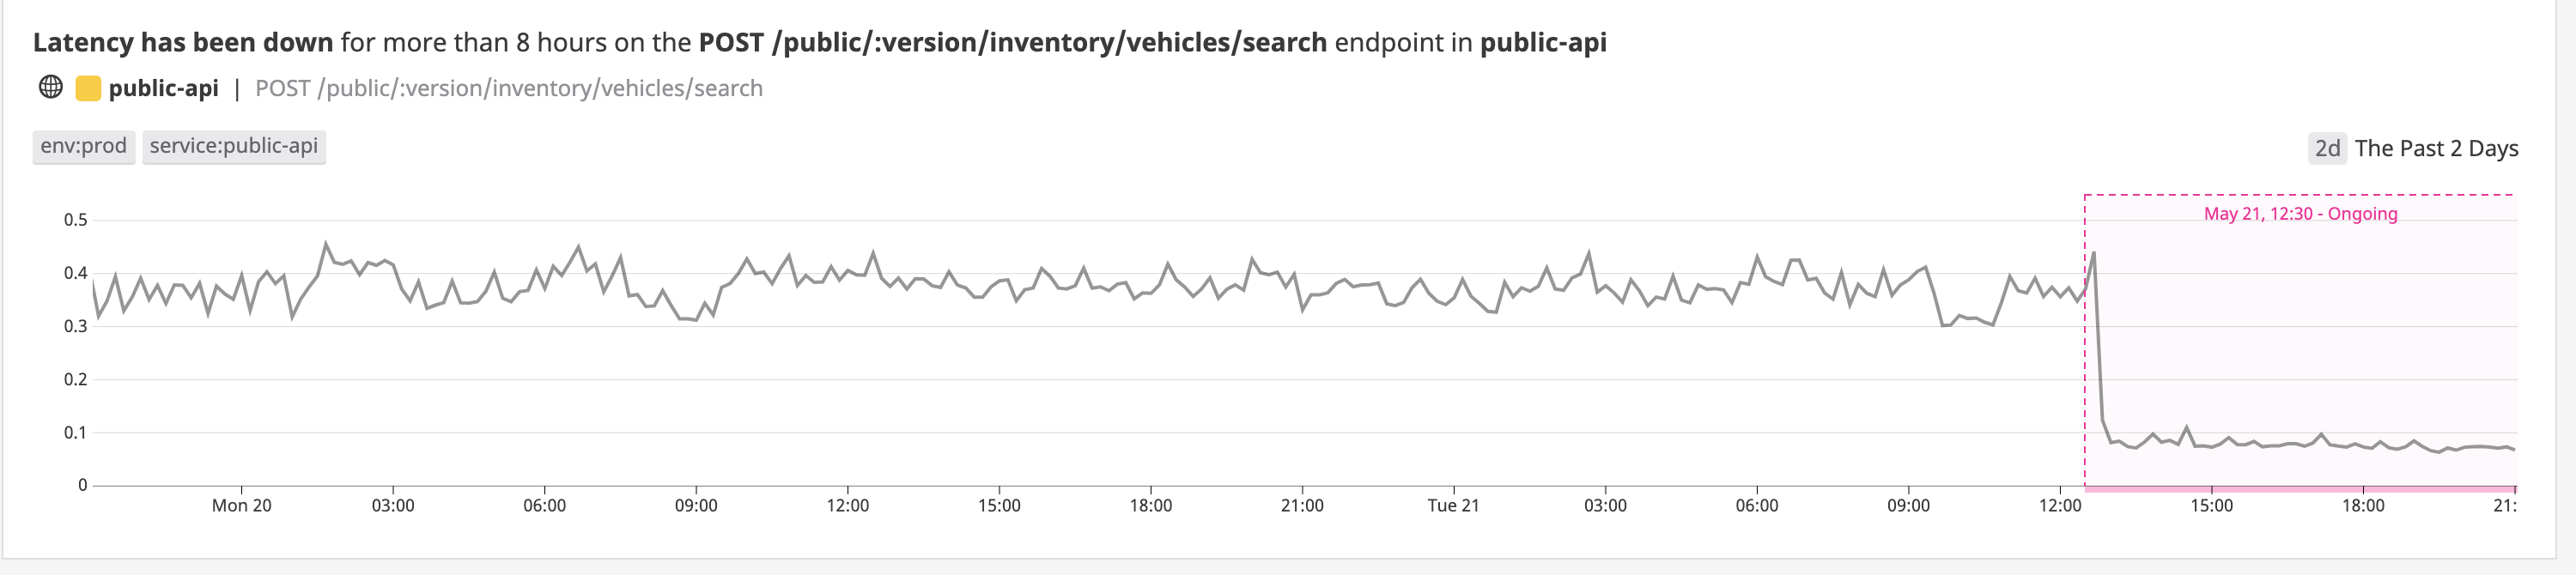 search_separation_low_latency_caused_datadog_alert.png